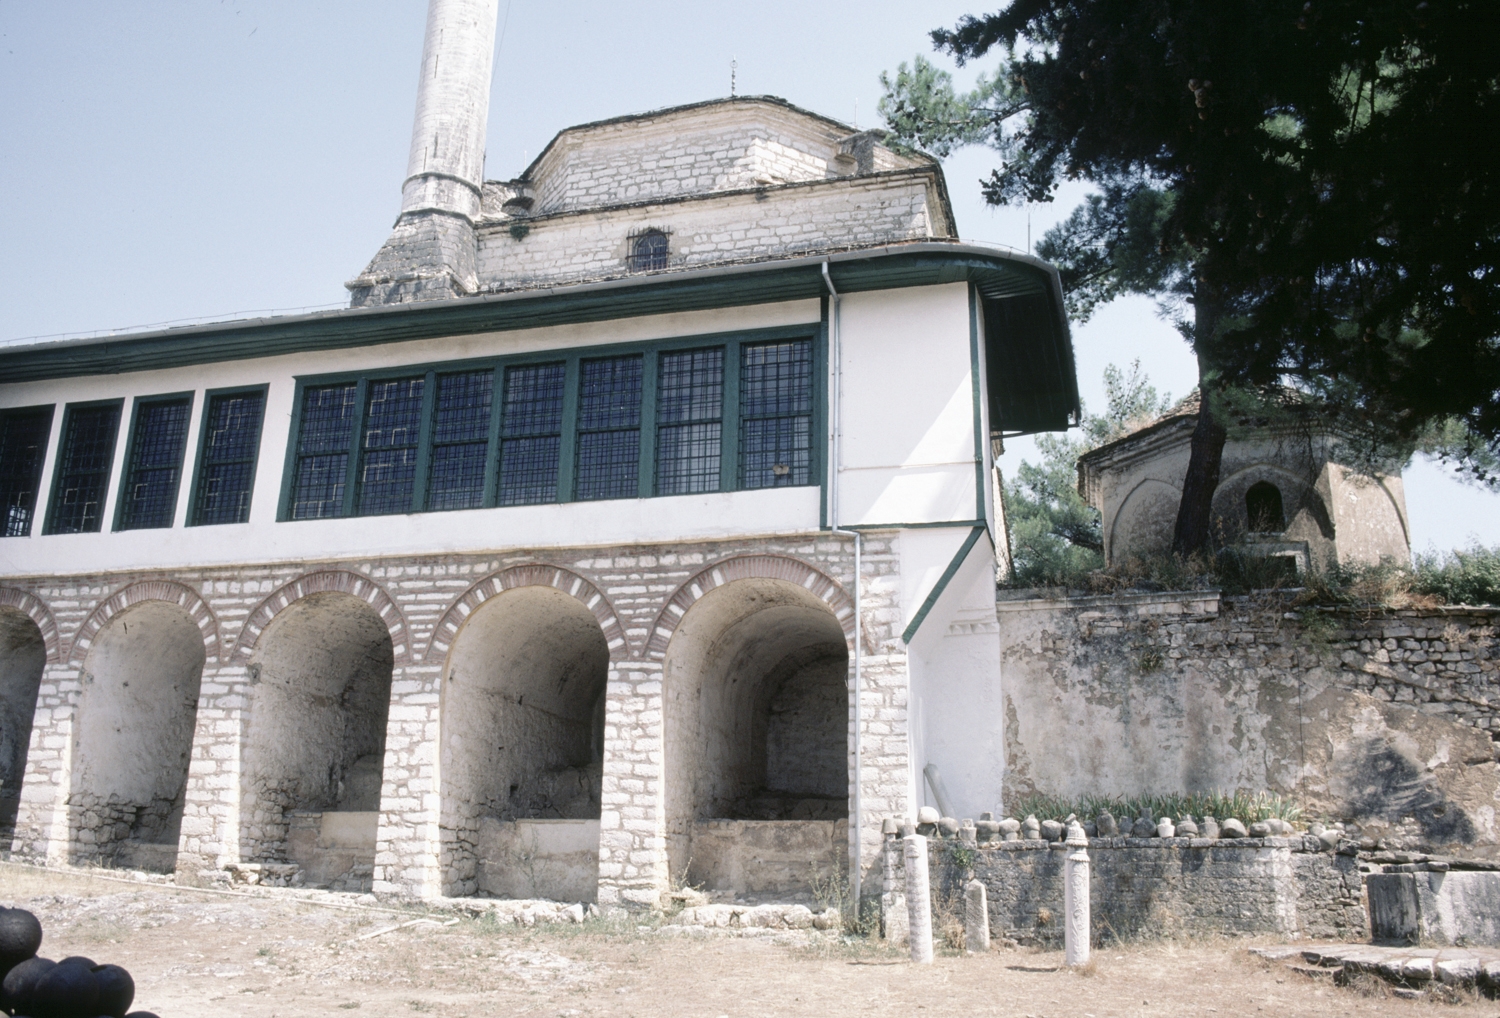 Southern elevation, showing closed portico over stone vaults for ablution; eight-sided mausoleum believed to belong to Aslan Pasha at right